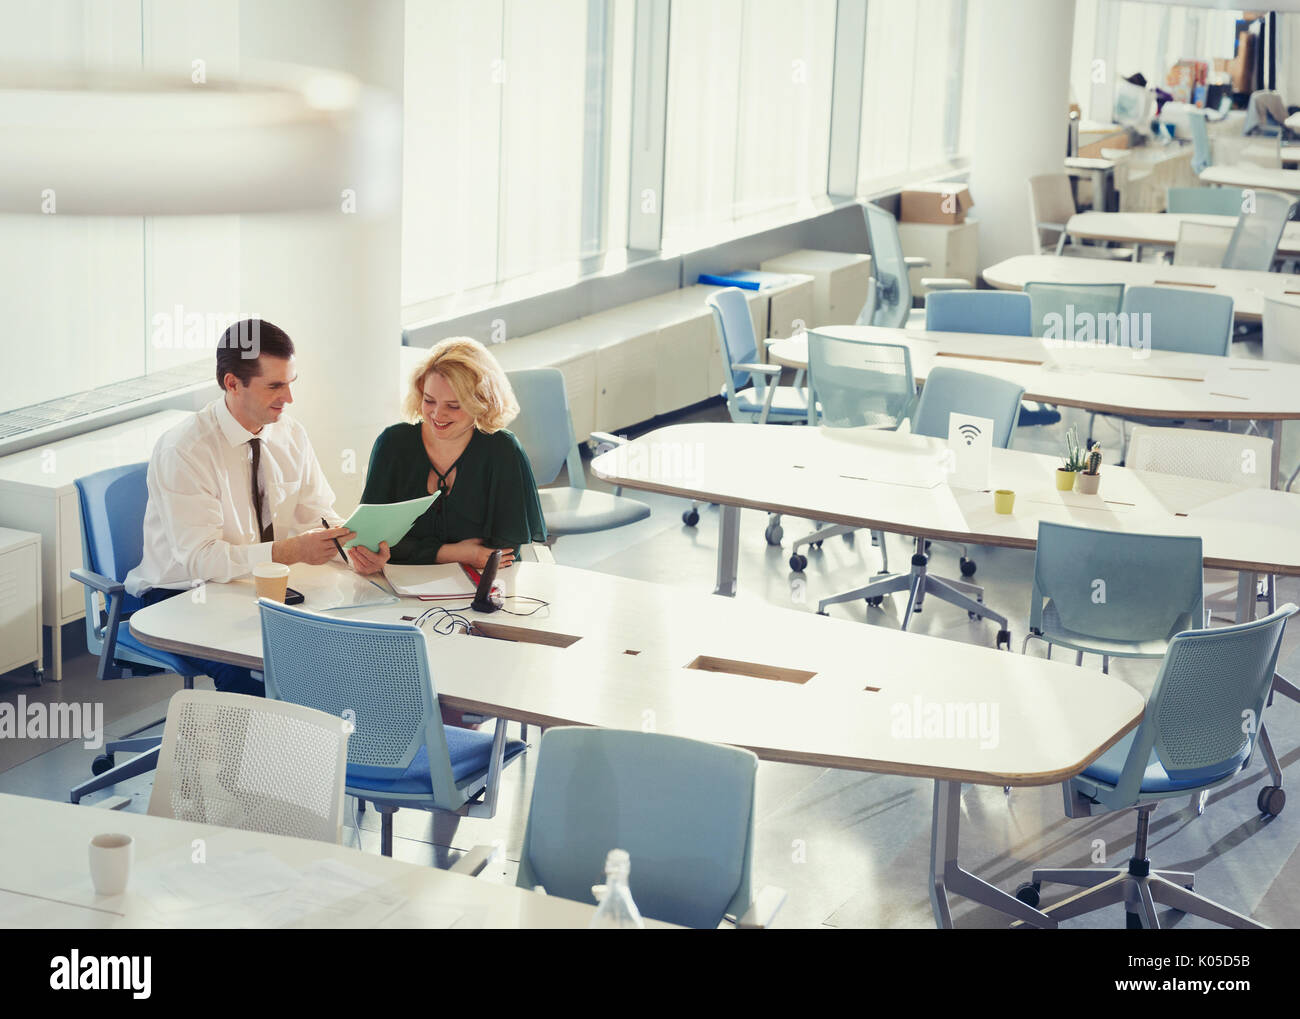 Businessman and businesswoman discussing paperwork at table in shared workspace Banque D'Images